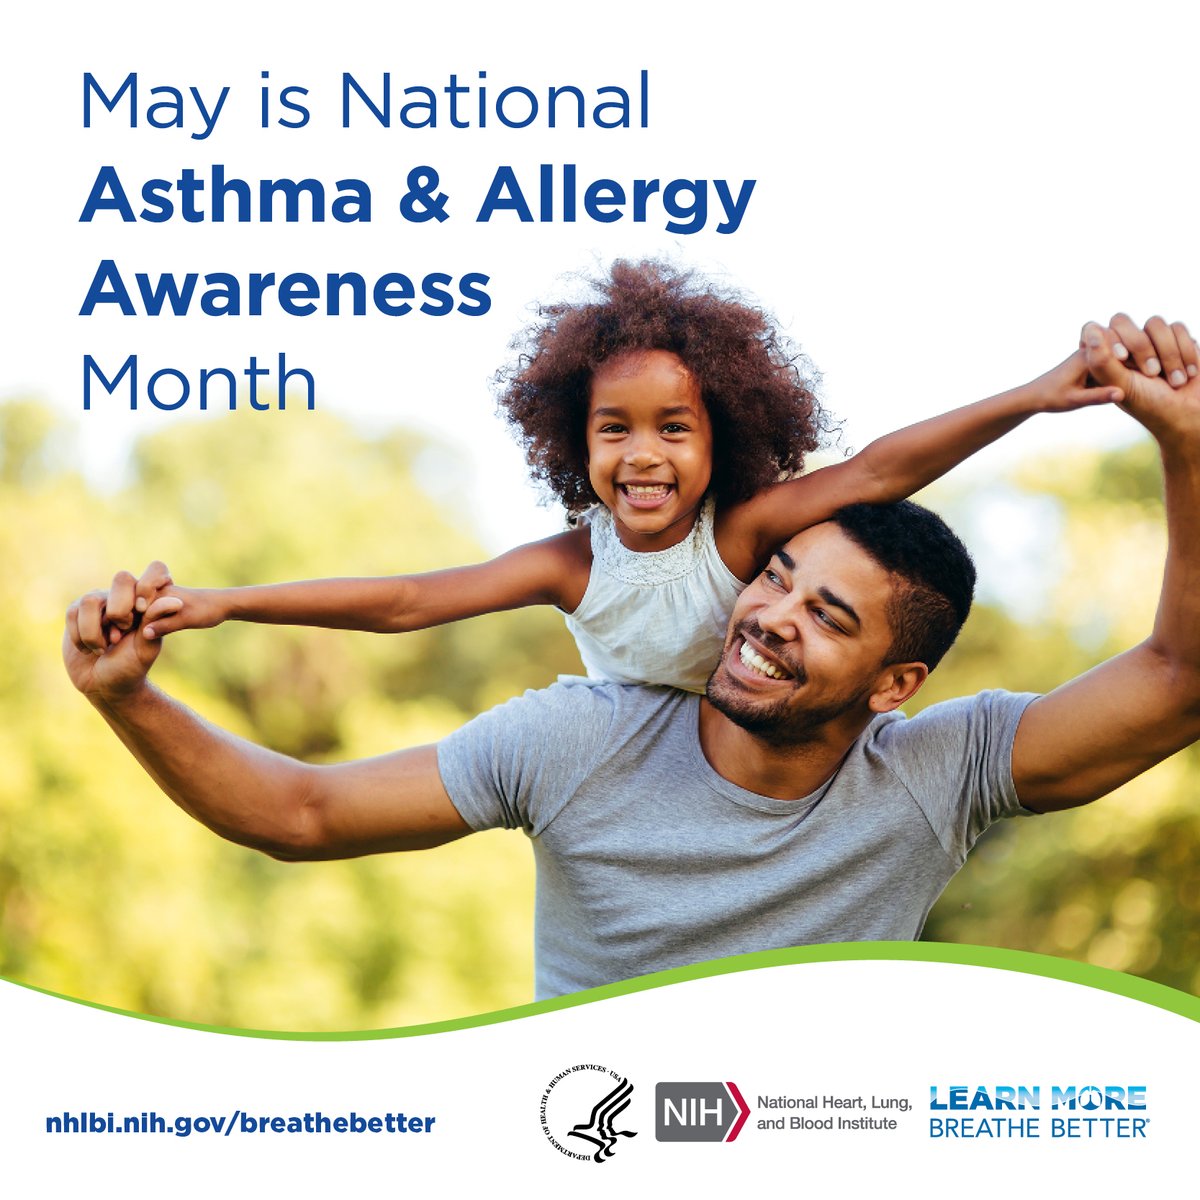 Community Health Workers can have a life-changing impact for families of children living with uncontrolled asthma by providing asthma education & environmental remediation via home visits. Learn more about home visits: ow.ly/q7Y050RUcYa #AsthmaAwarenessMonth